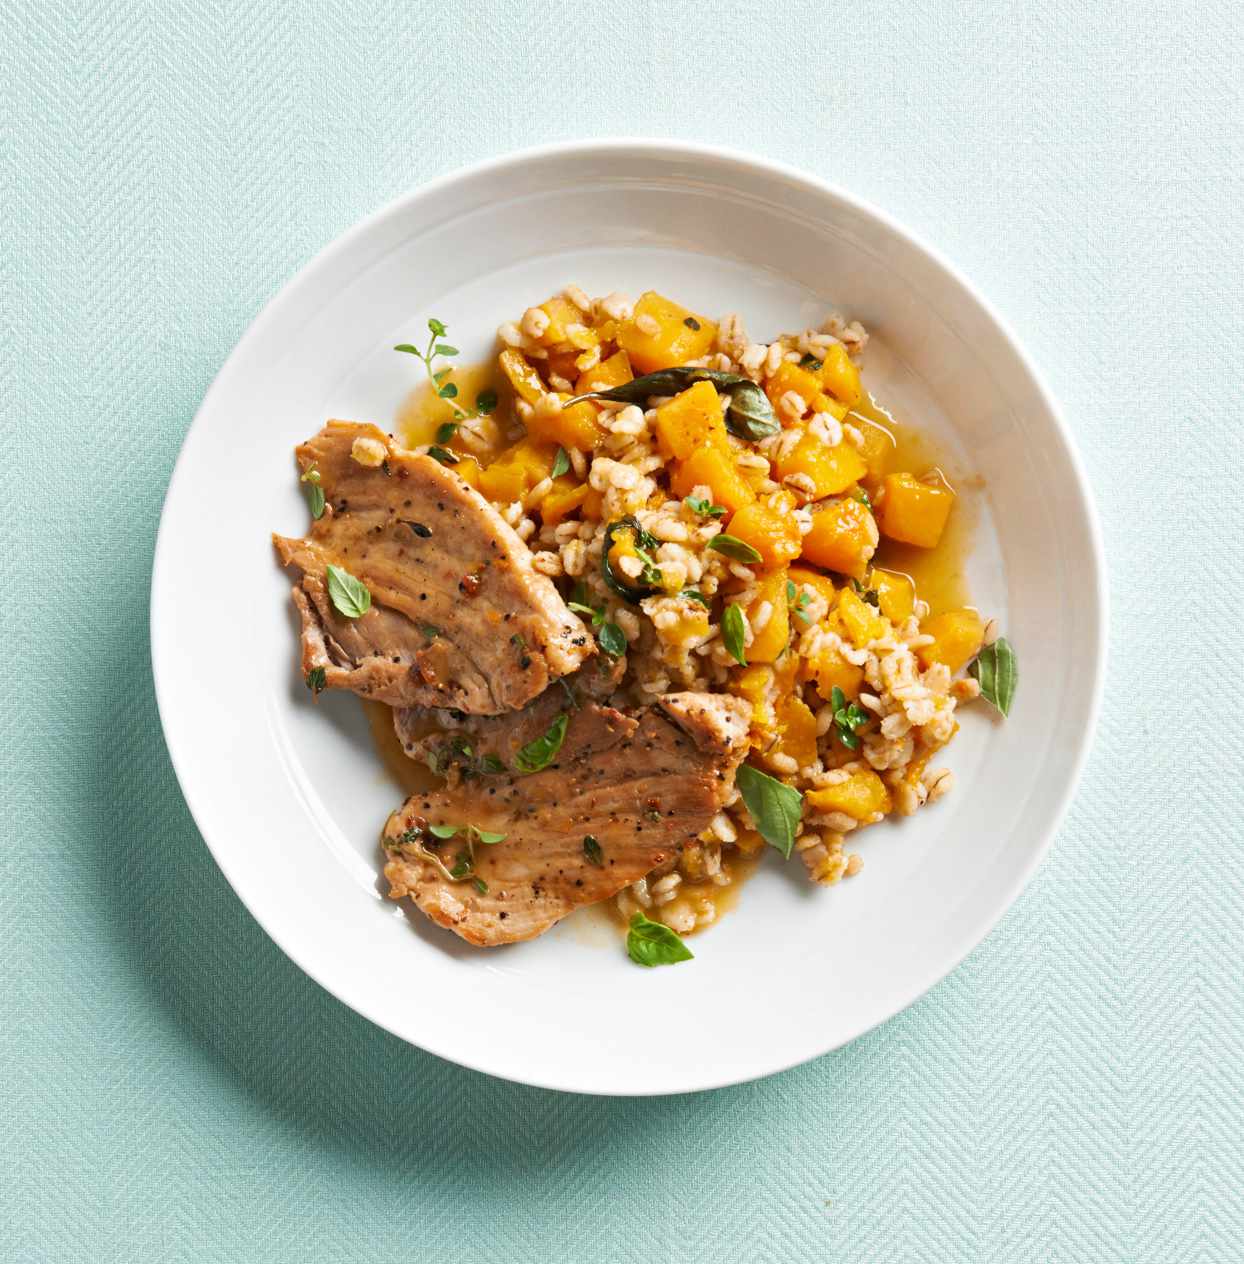 Pork with Butternut Squash Barley Risotto